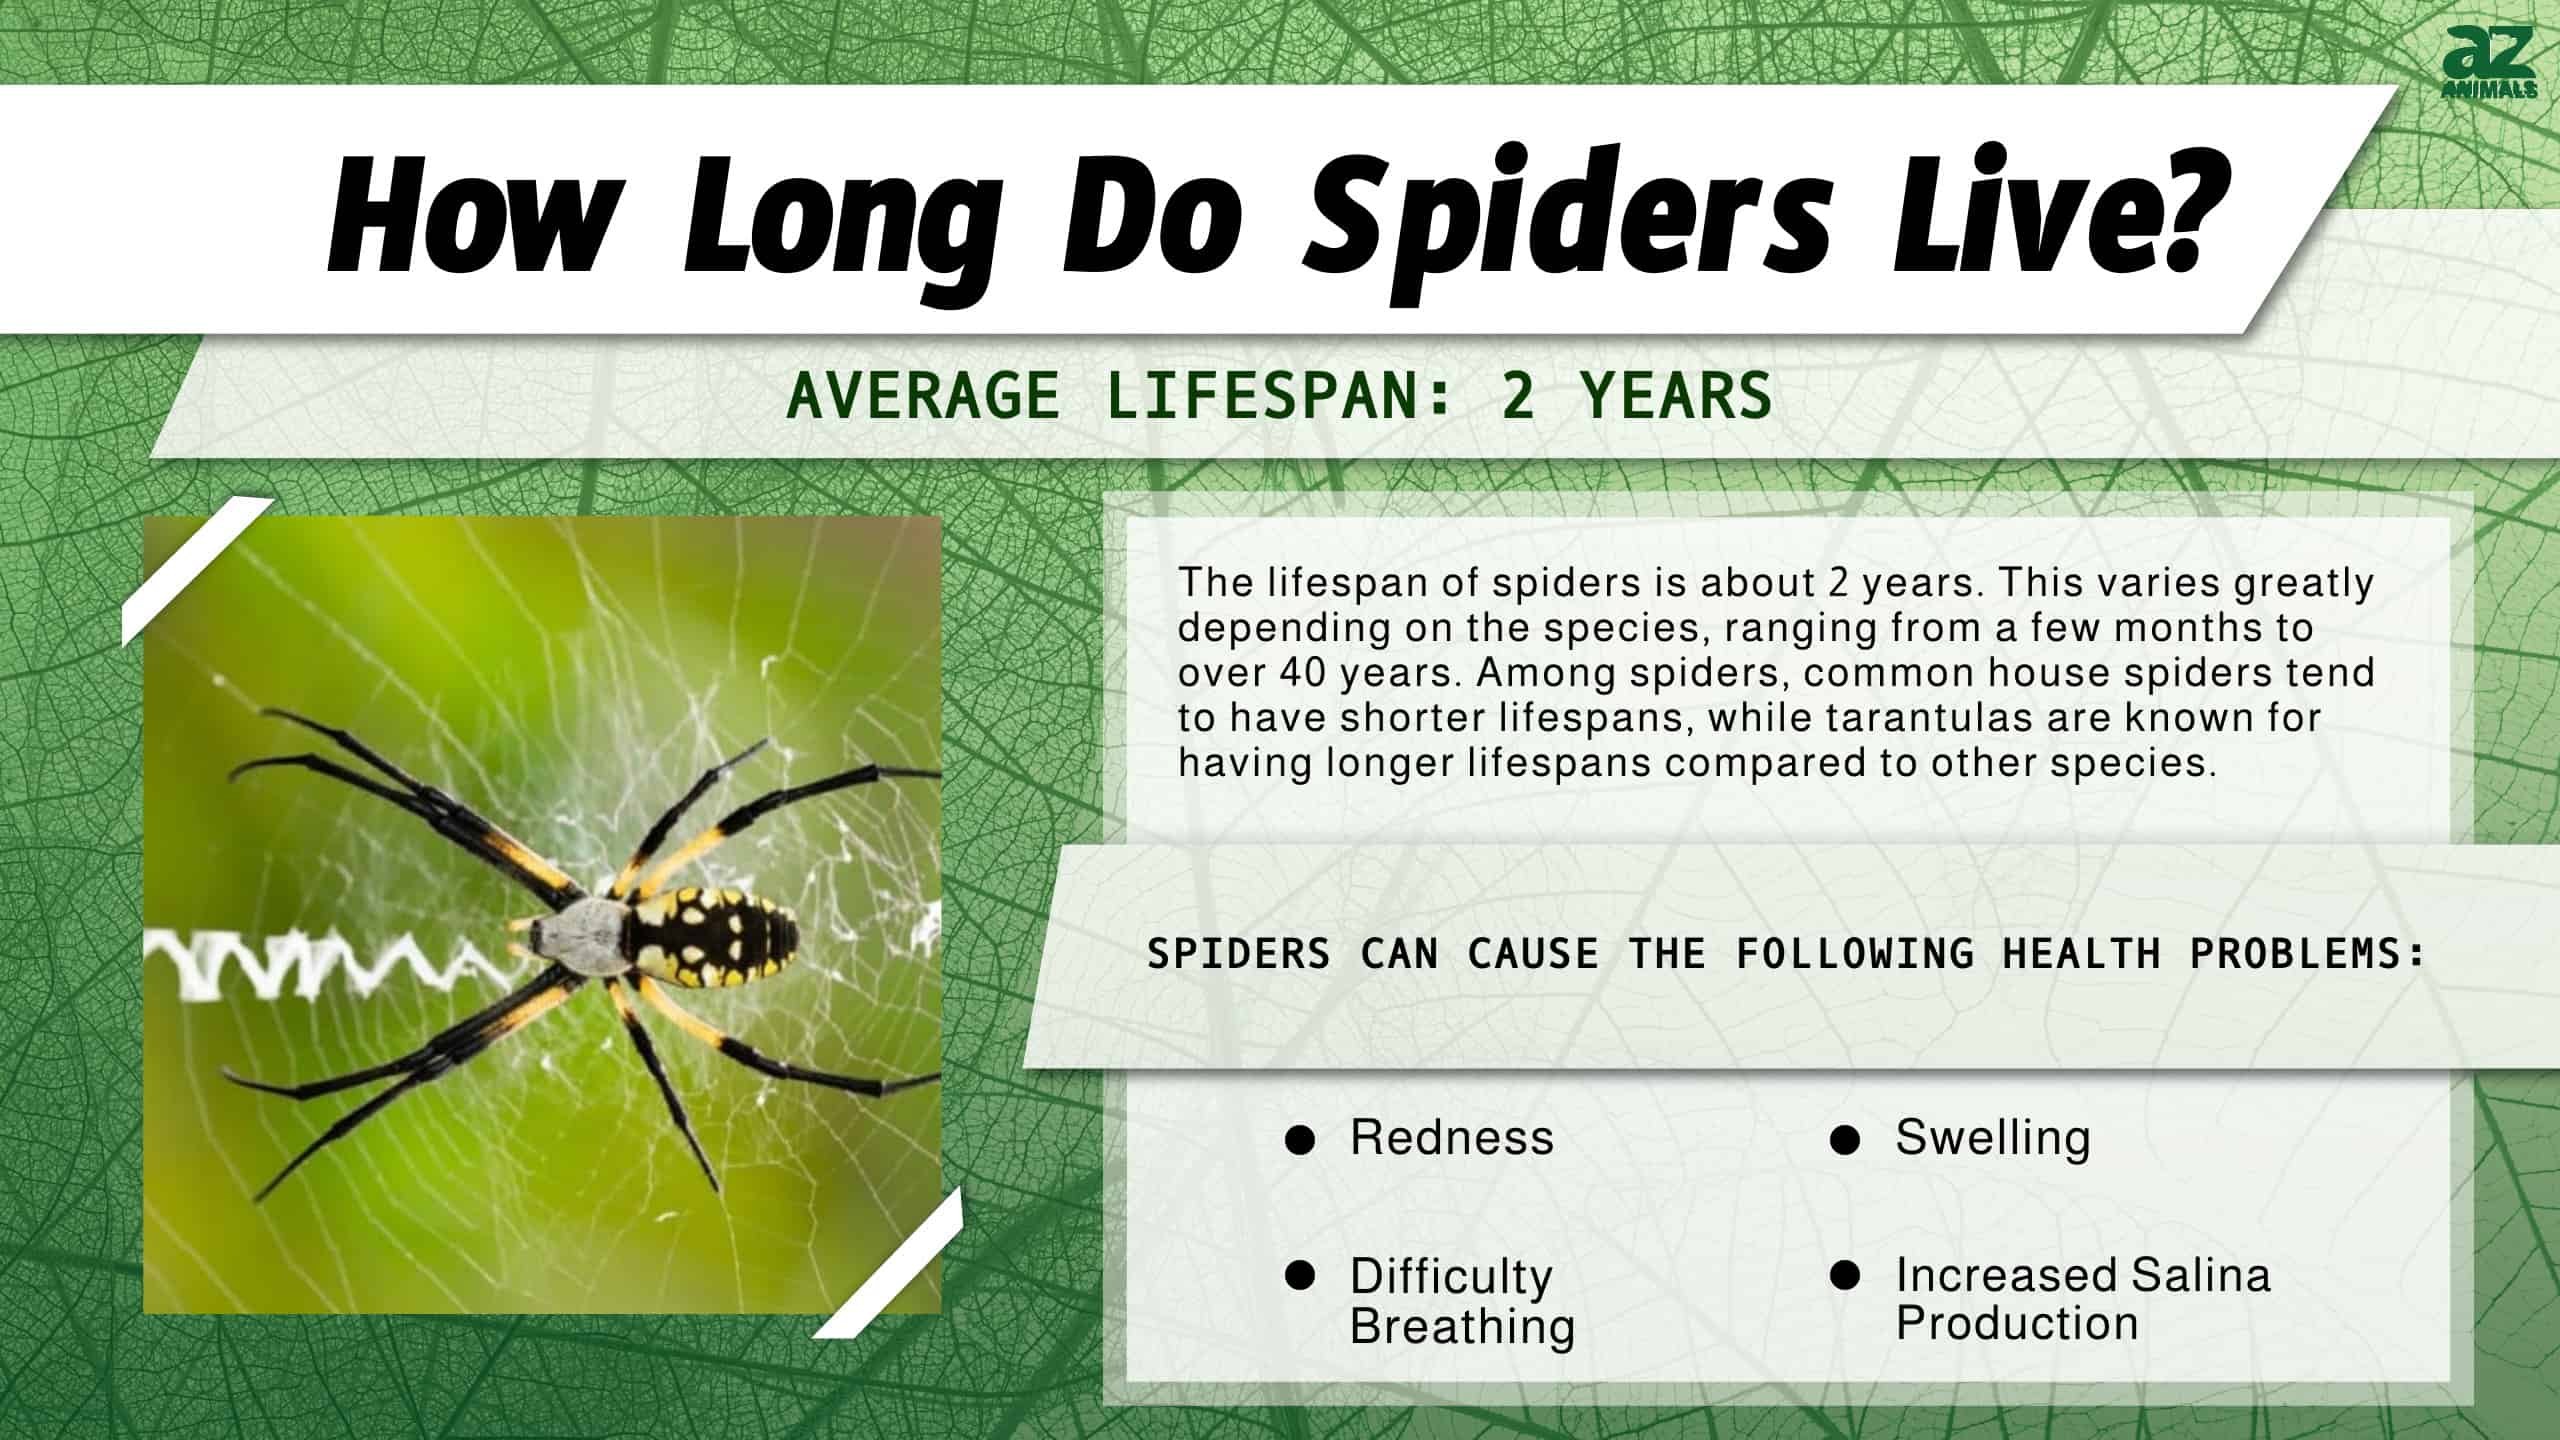 How Long Do Spiders Live? infographic